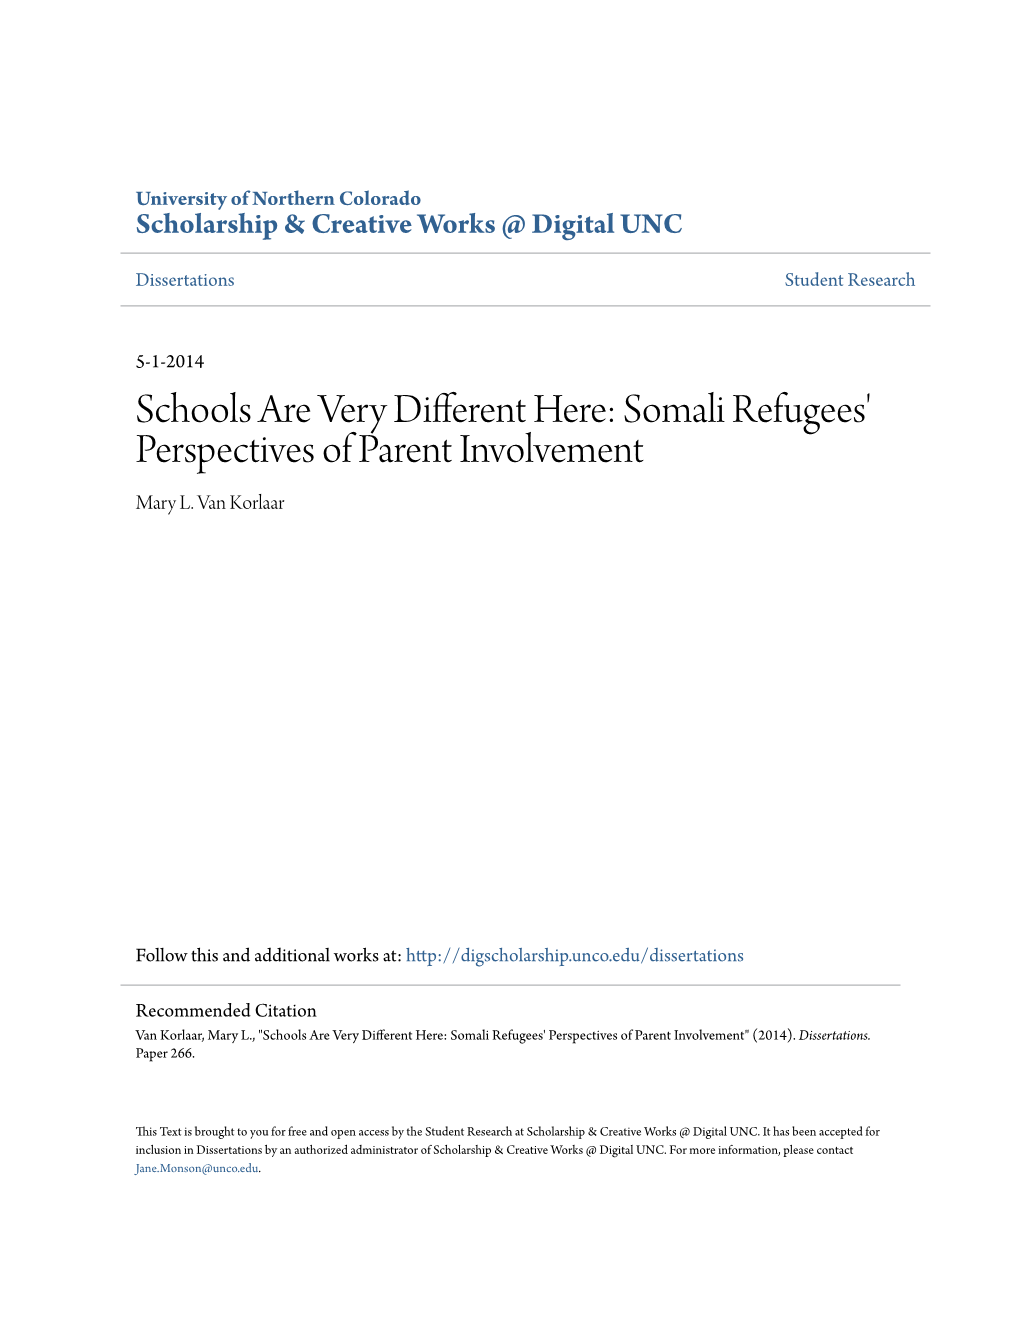 Somali Refugees' Perspectives of Parent Involvement Mary L